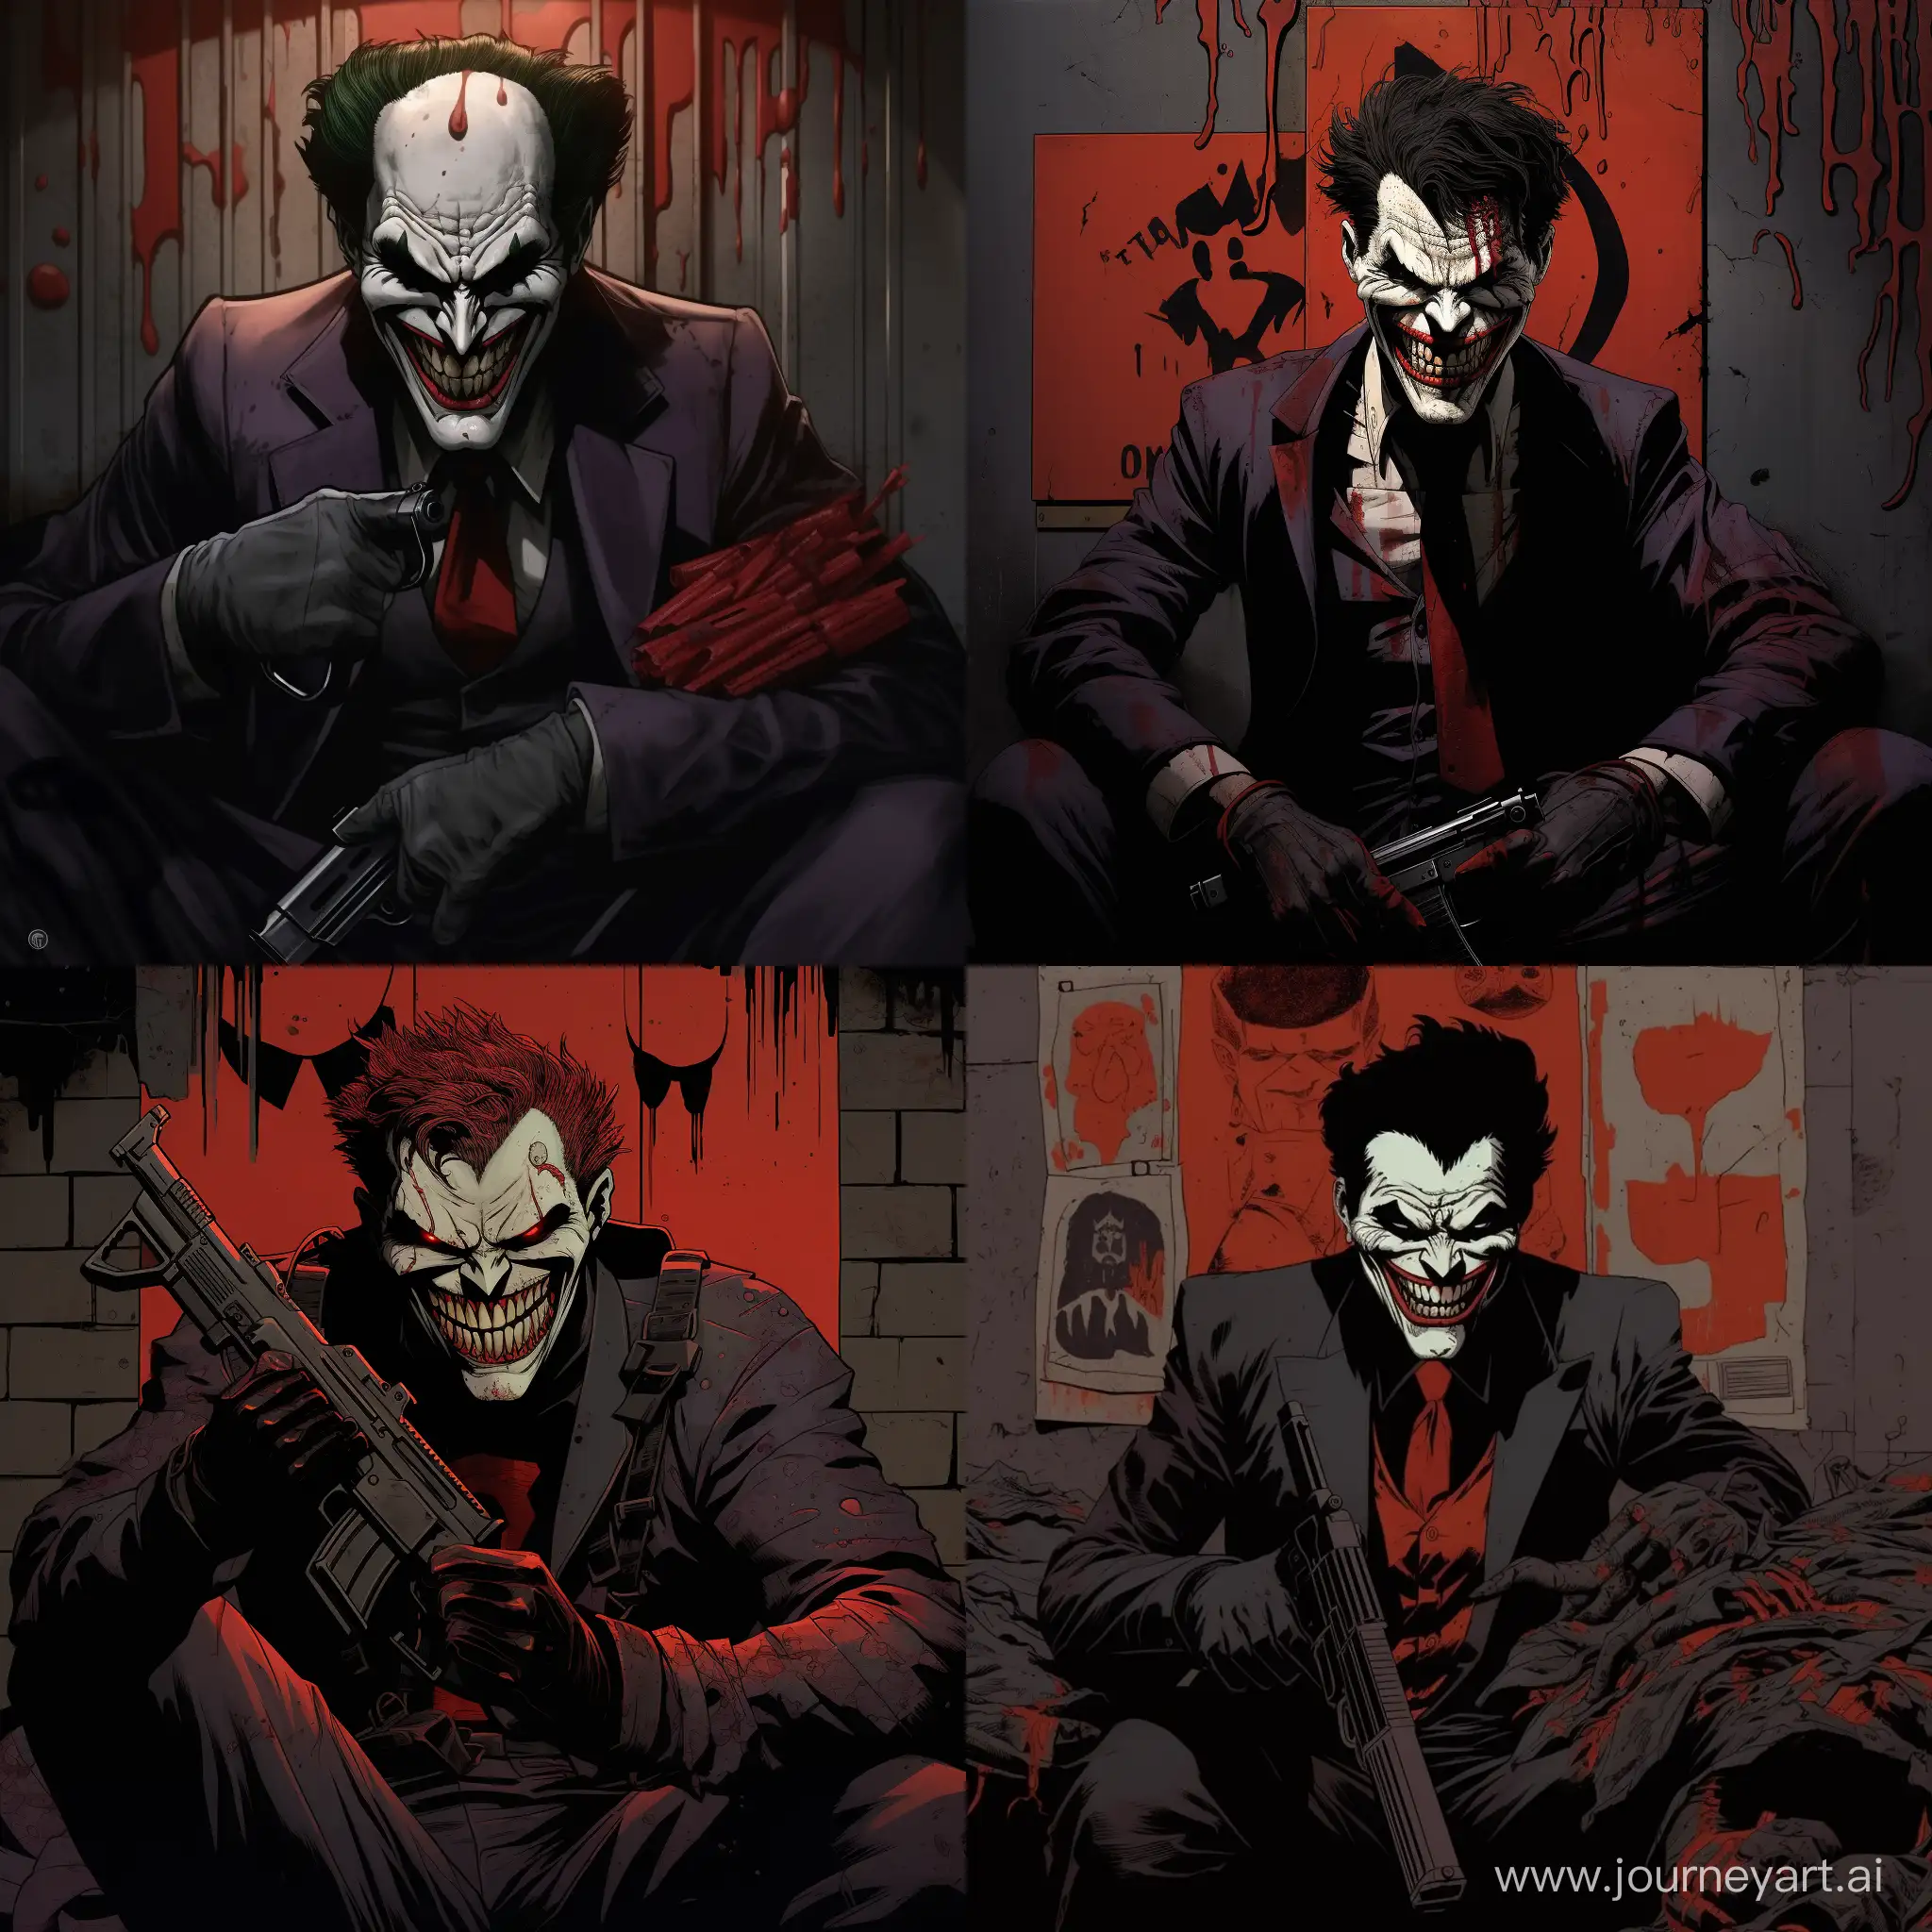 The Joker is sitting with a wall behind him with “3ZF” written on it in red , holding a gun in his hand, his sinister smile hinting at chaos.